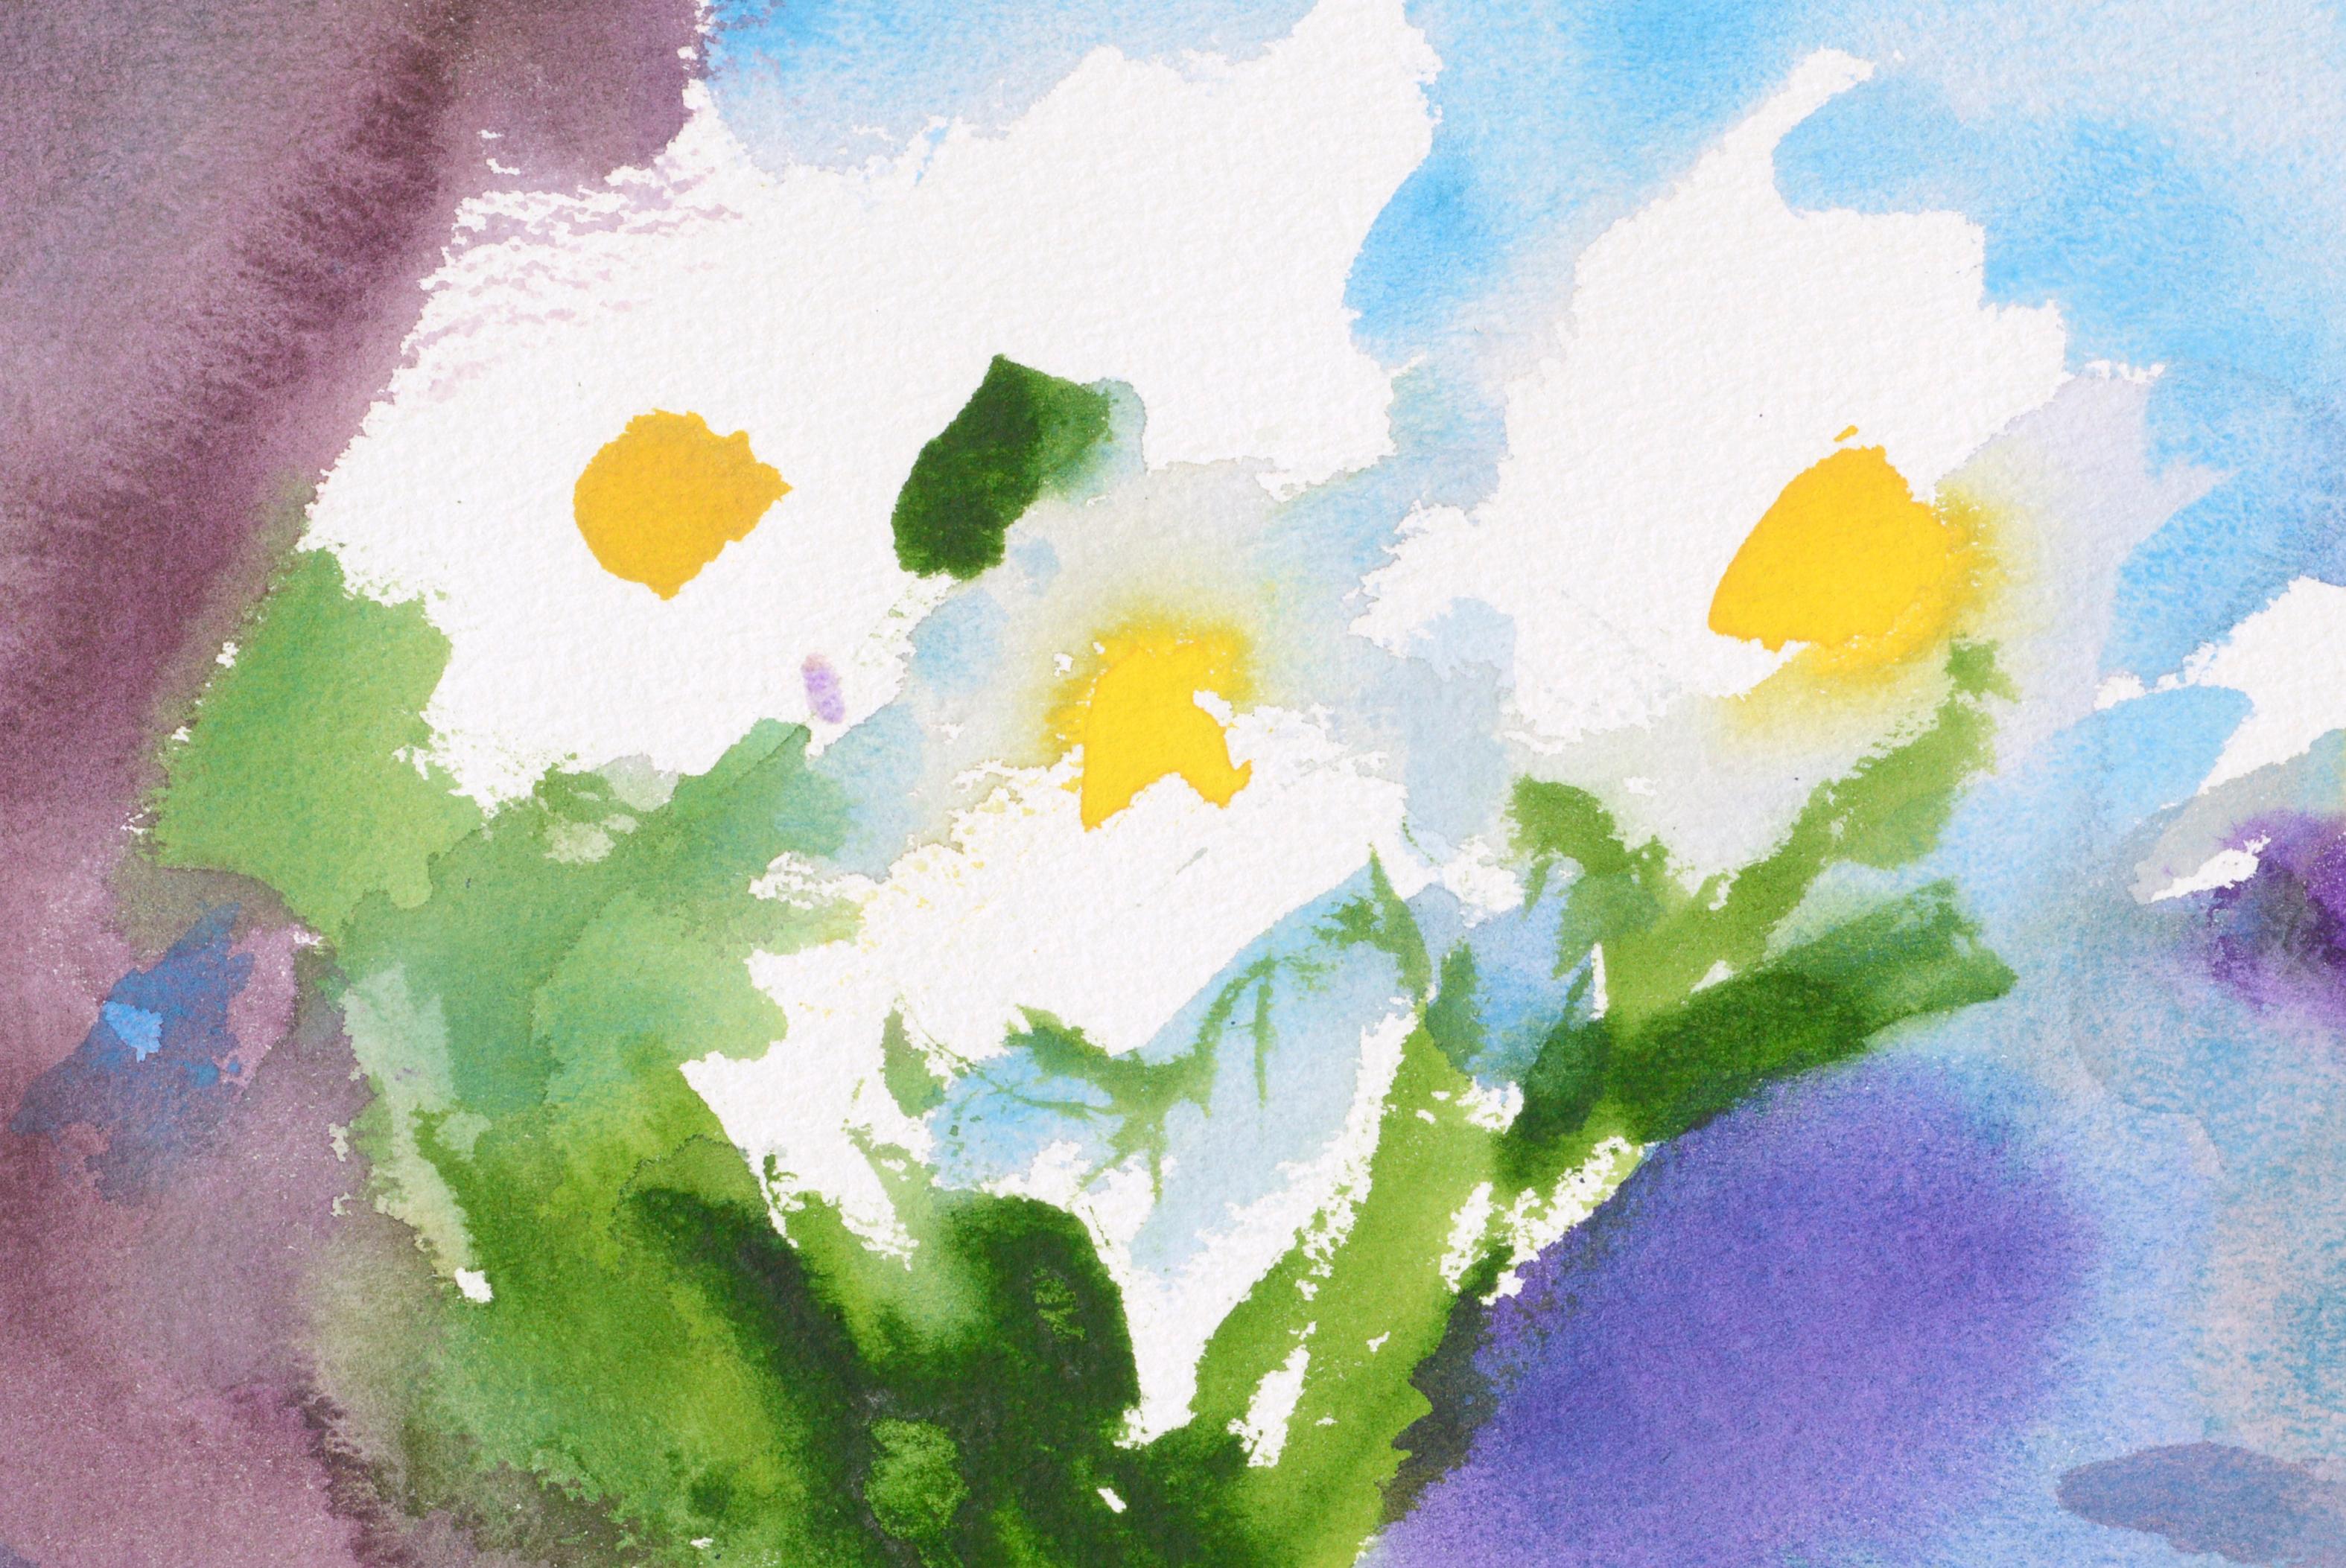 Abstracted Still Life of White and Yellow Flowers  - Art by Les Anderson